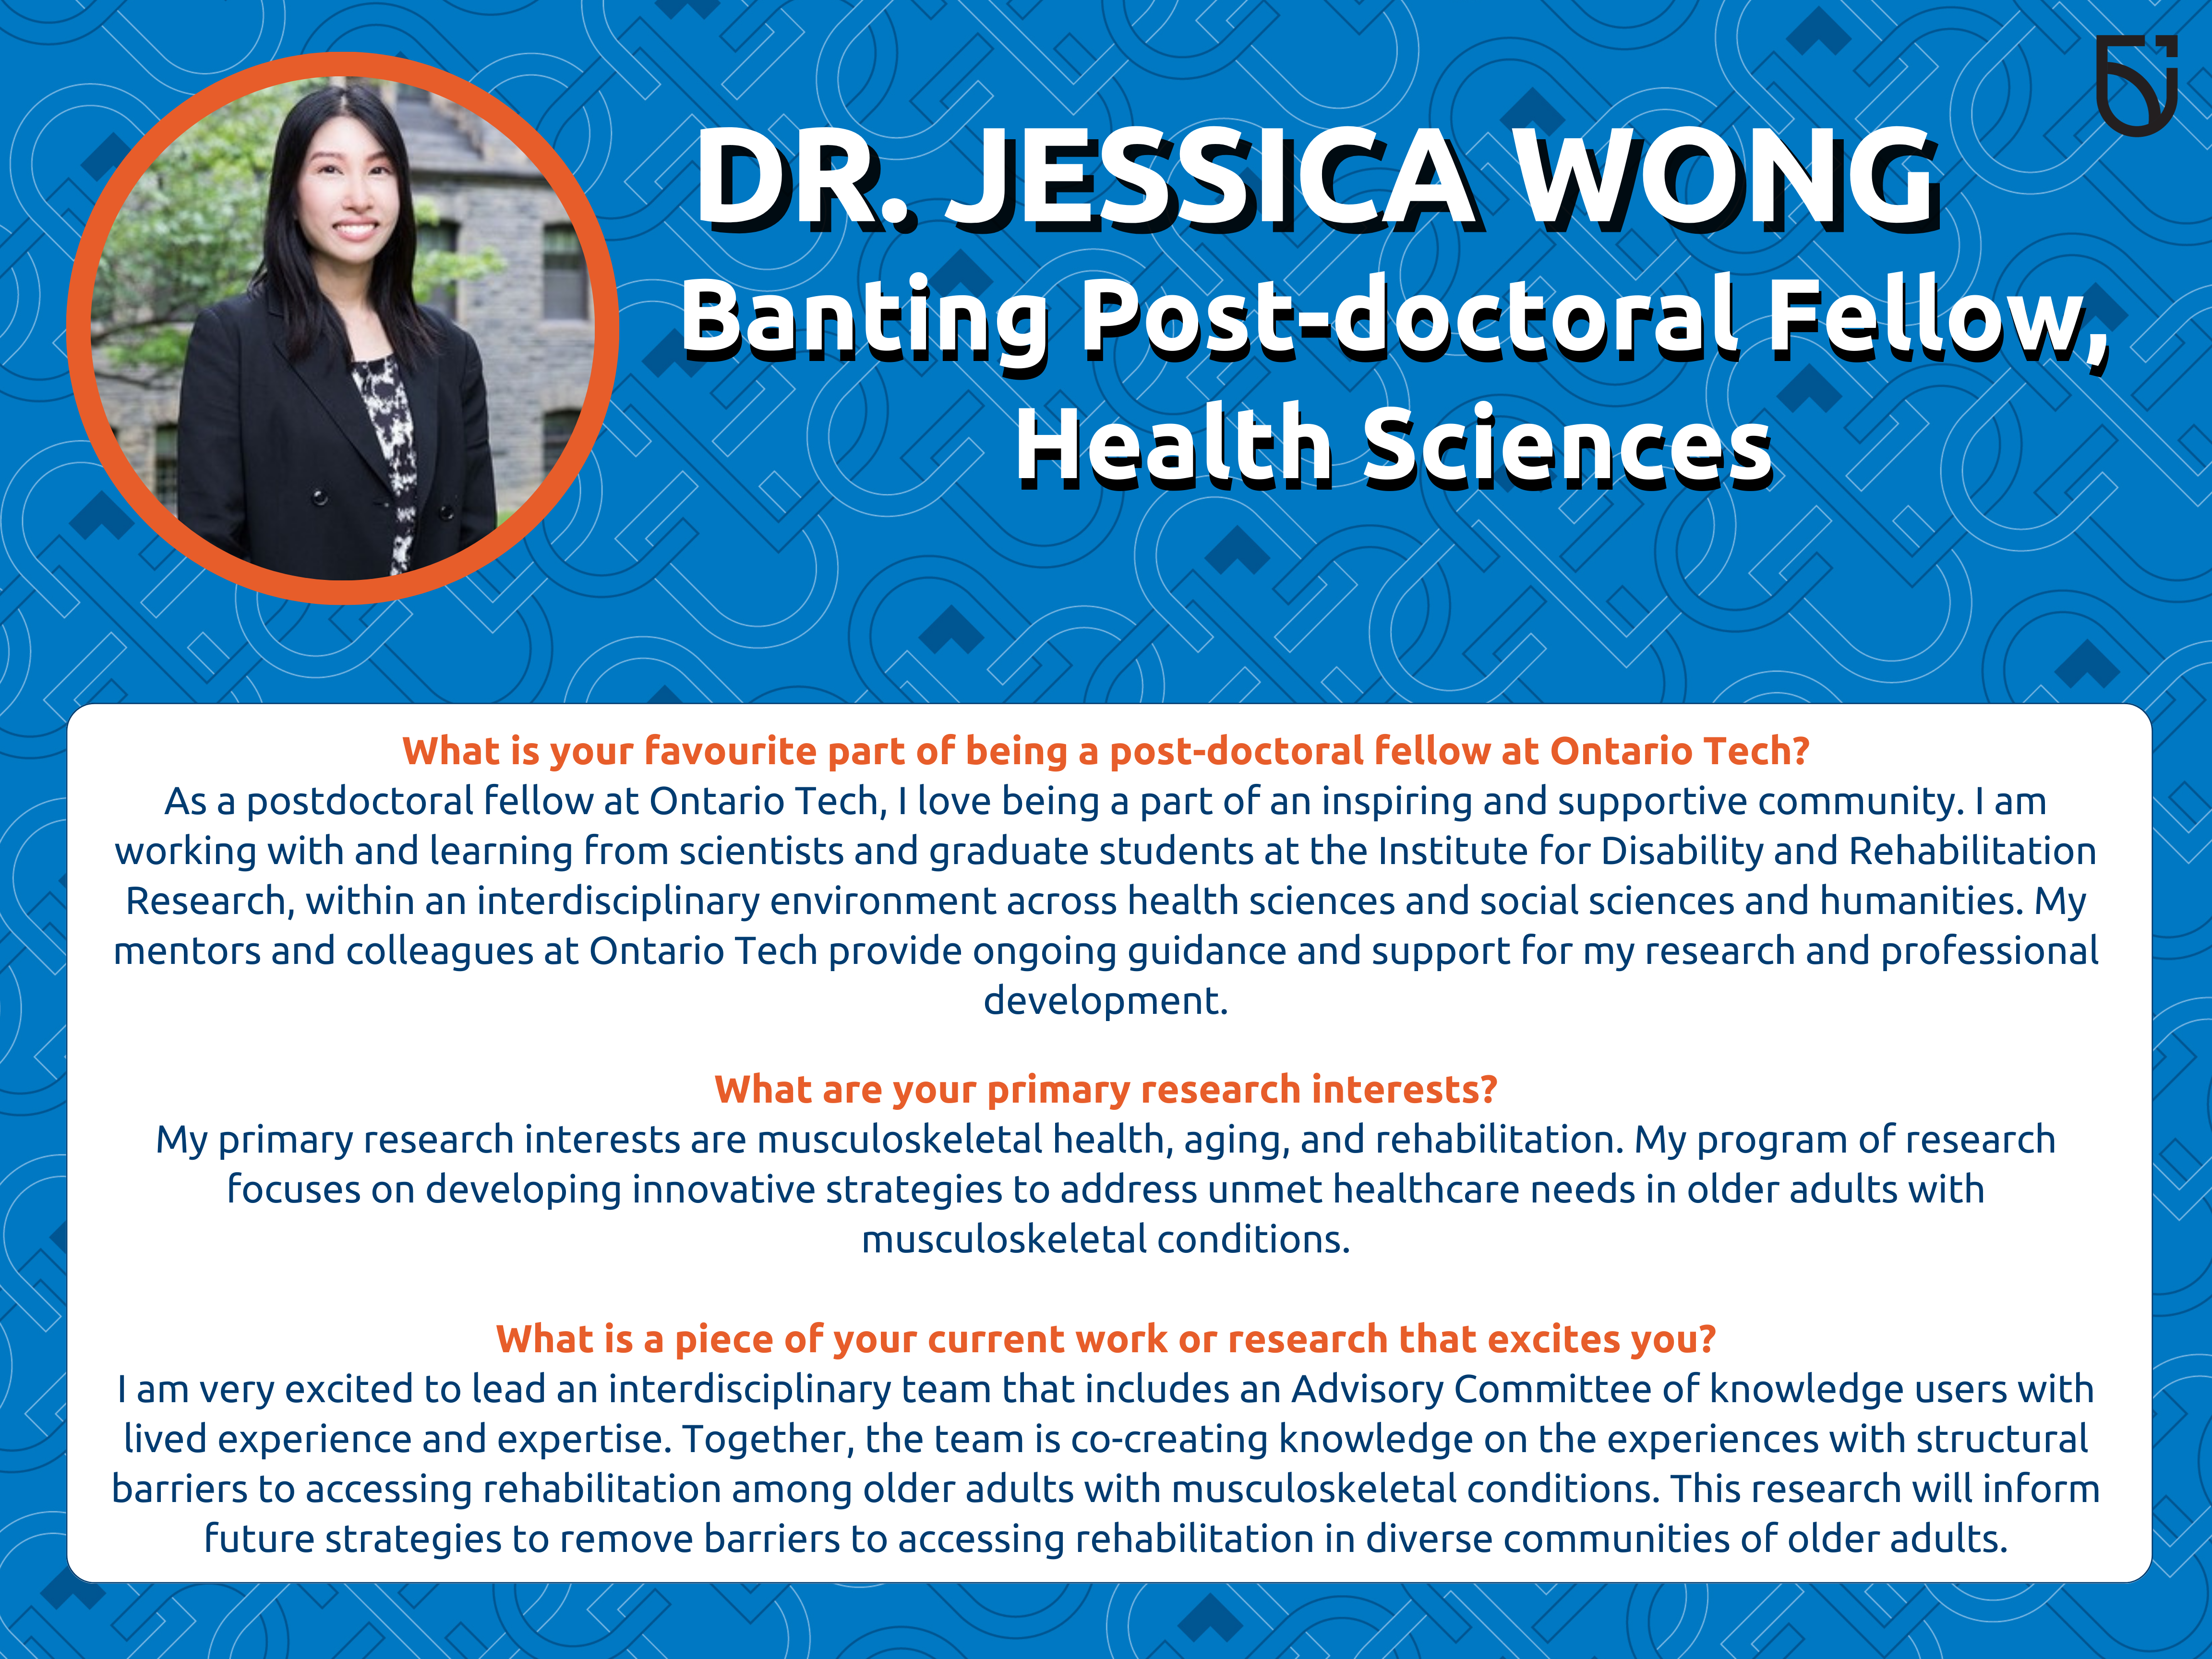 This photo is a Women’s Wednesday feature of Dr. Jessica Wong, a Banting Post-Doctoral Fellow of the Institute for Disability and Rehabilitation Research, in the Faculty of Health Sciences